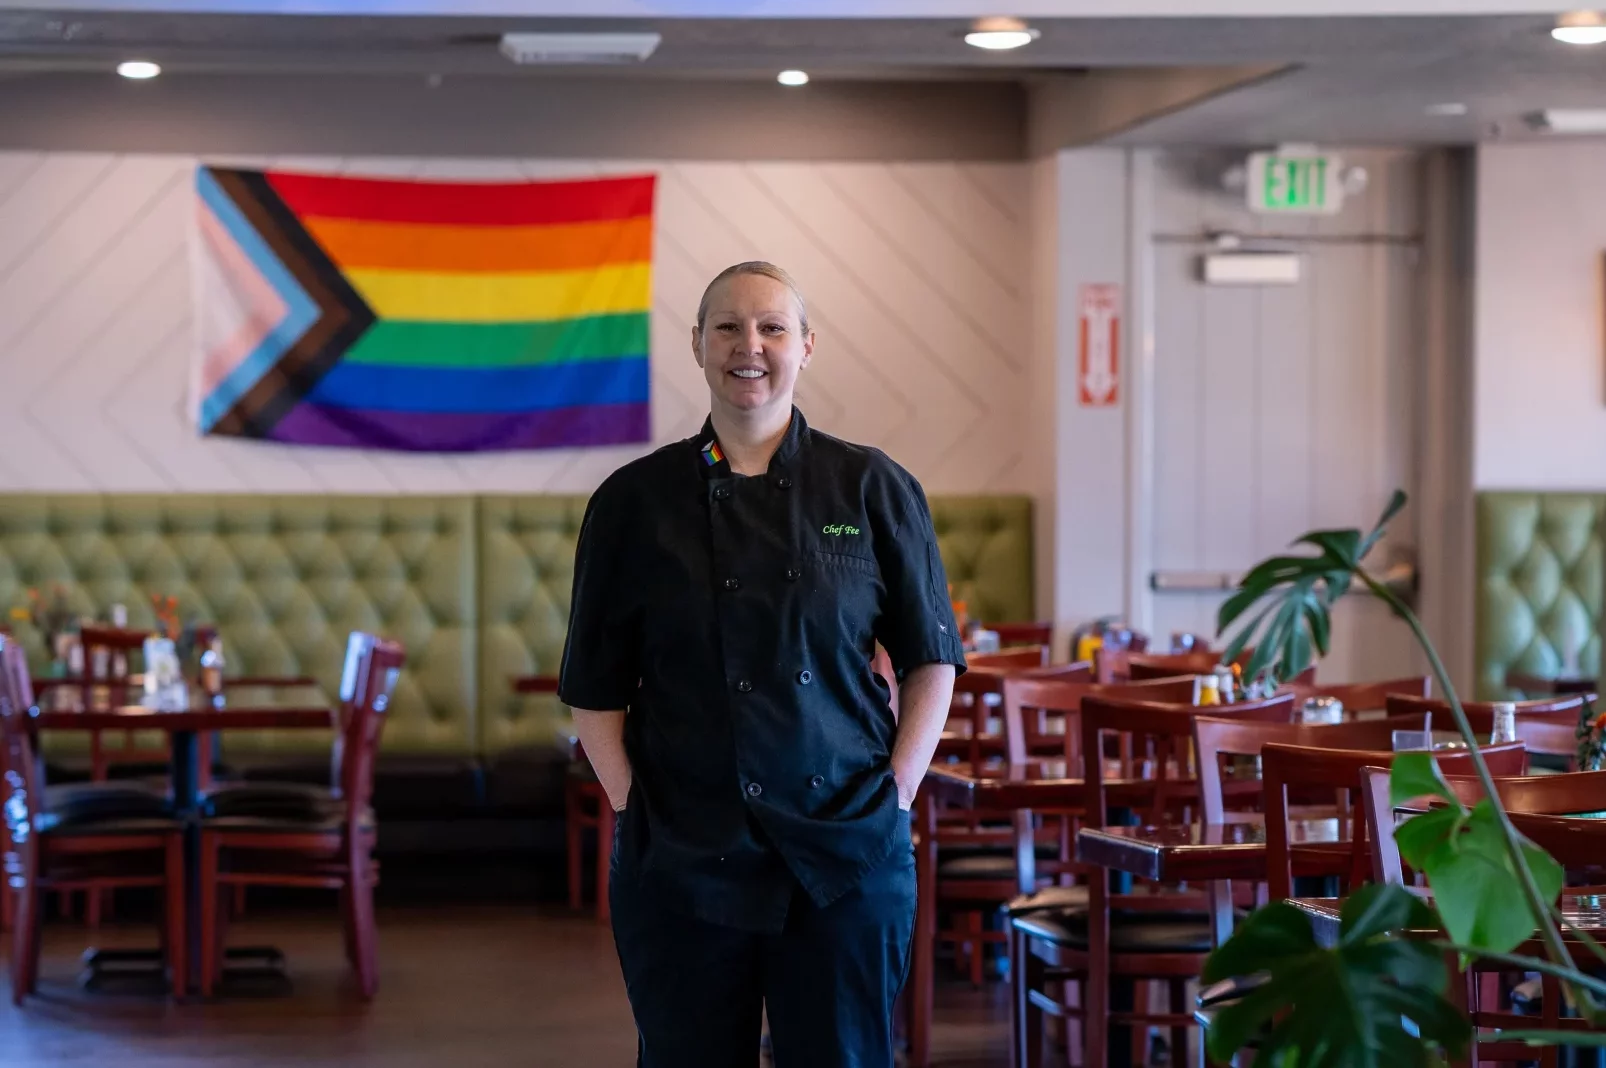 Felicia Hanson, owner and chef at Sweet Hazel and Co. Bakeshop and Bistro, stands in front of an LGBTQ Pride flag at the restaurant.